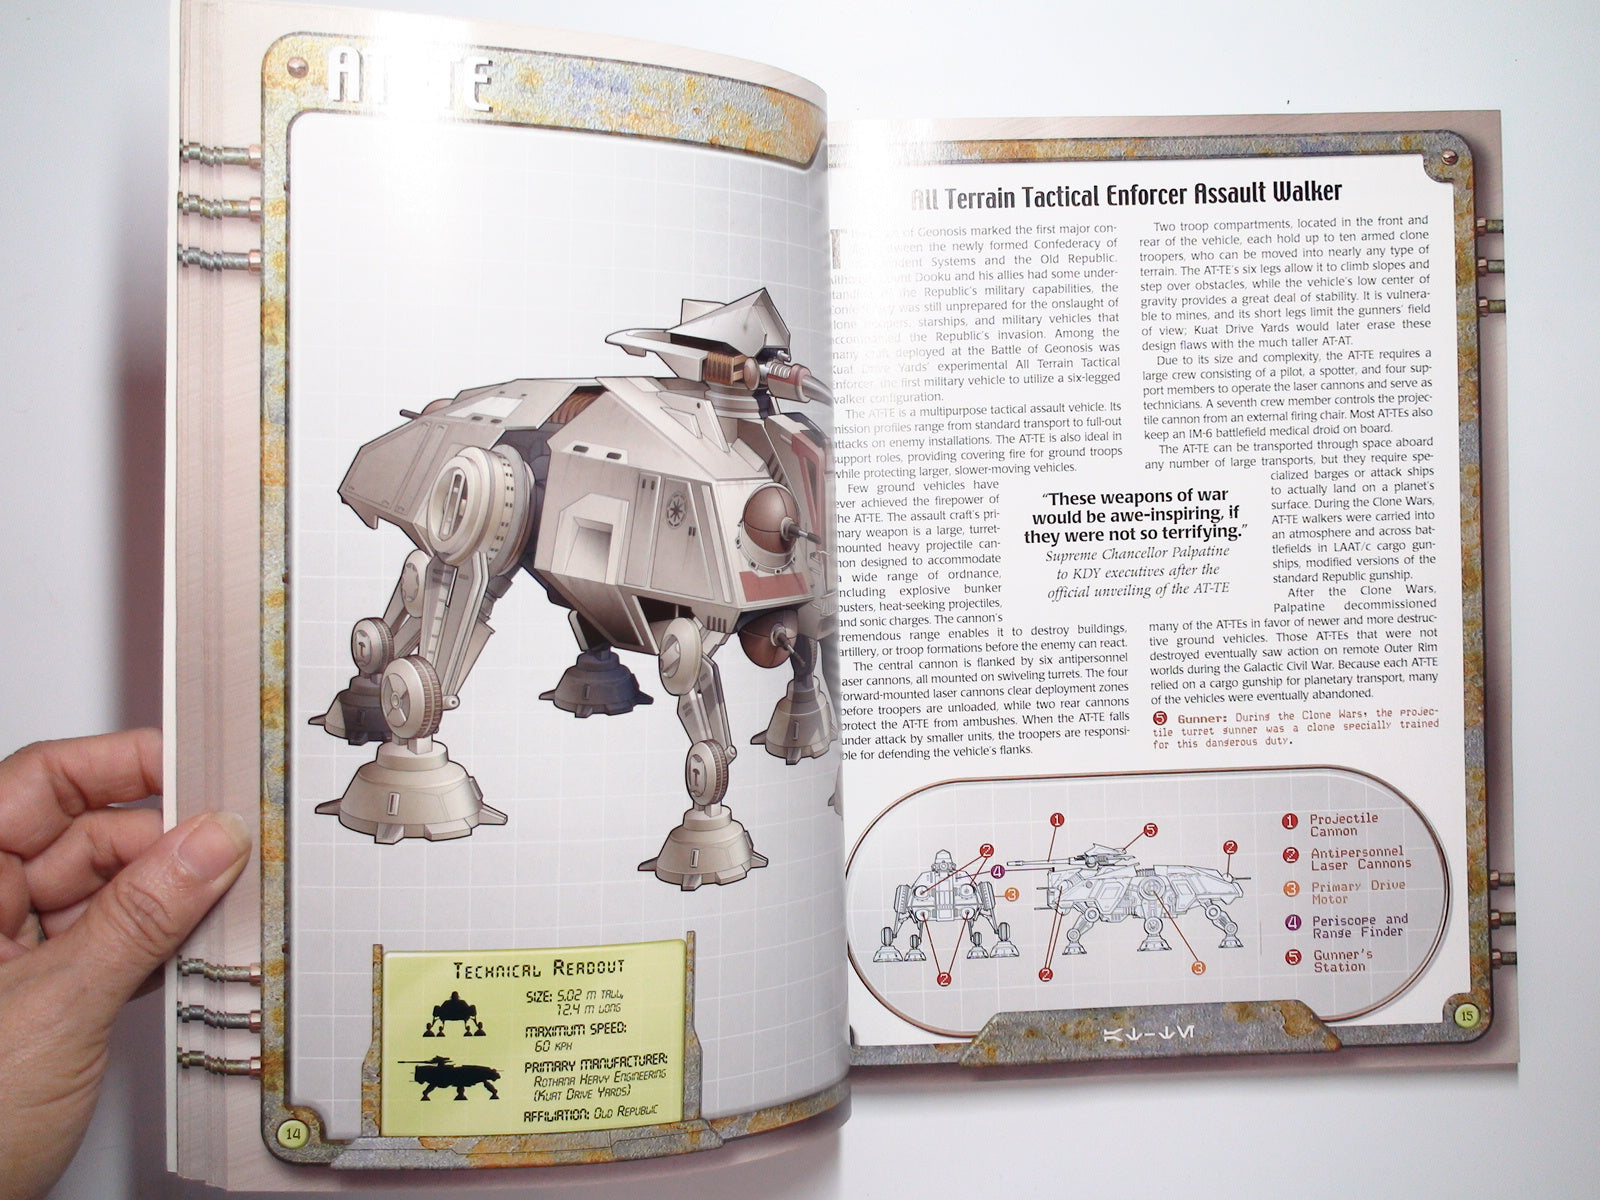 Star Wars, The New Essential Guide to Vehicles & Vessels, 2003